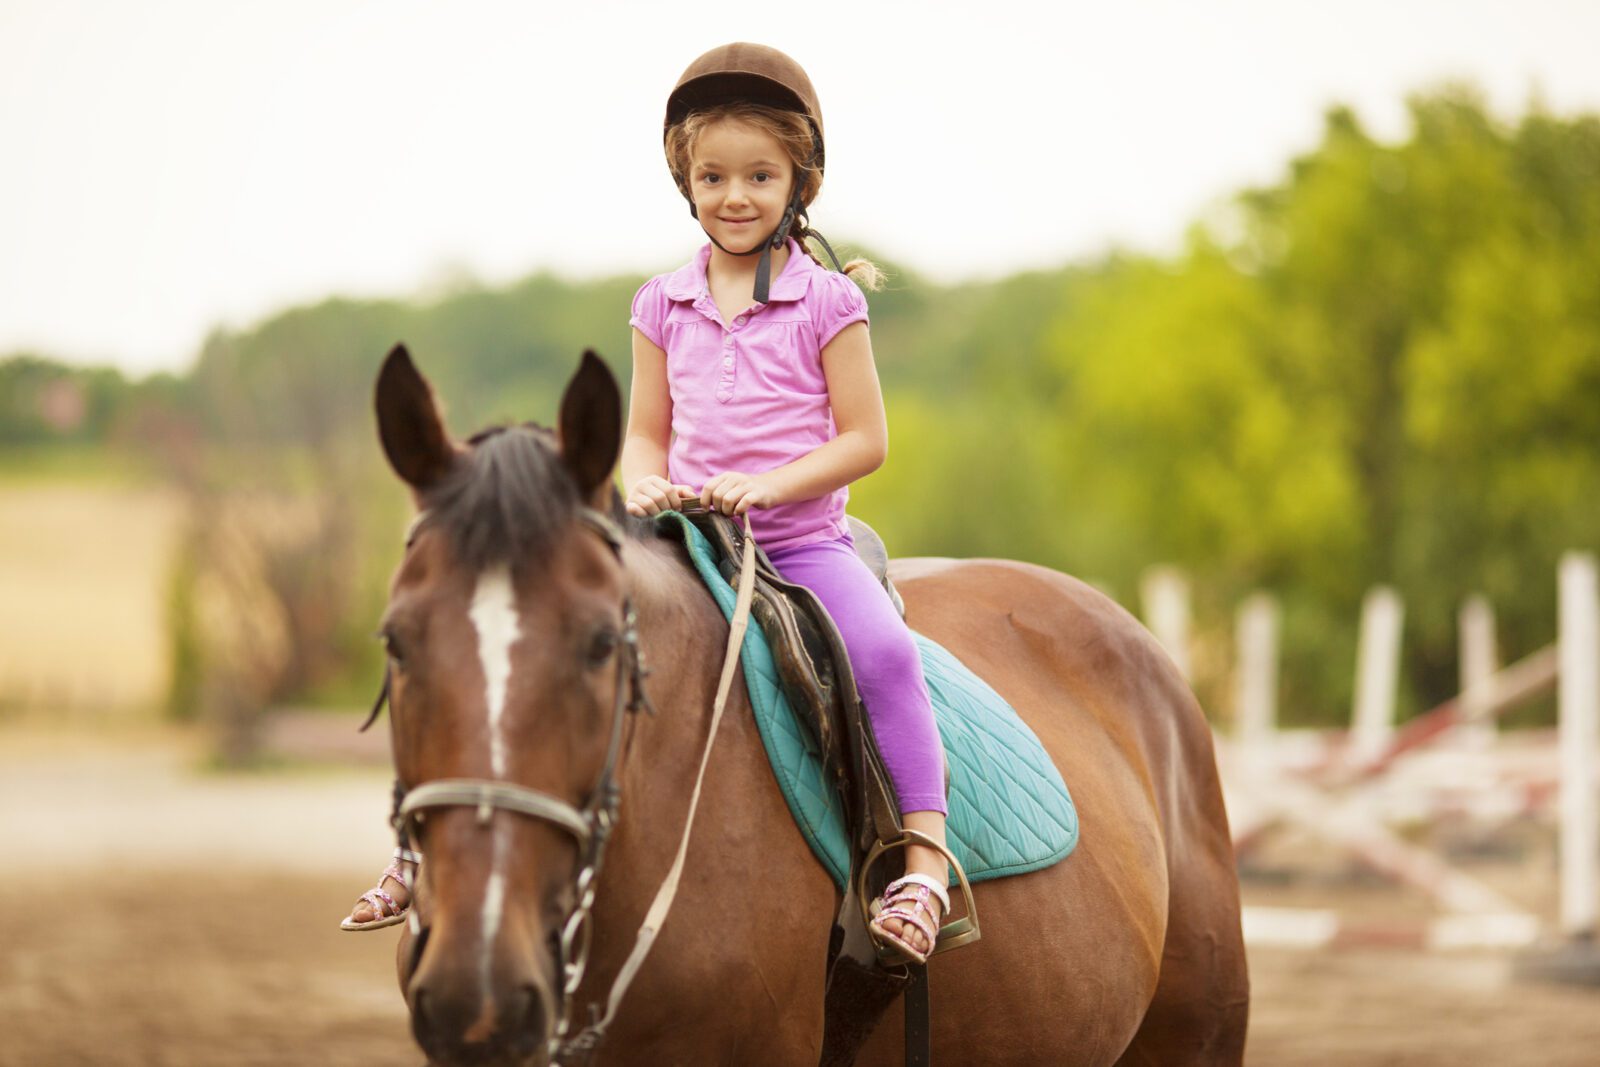 Child Riding Horse Outdoors.